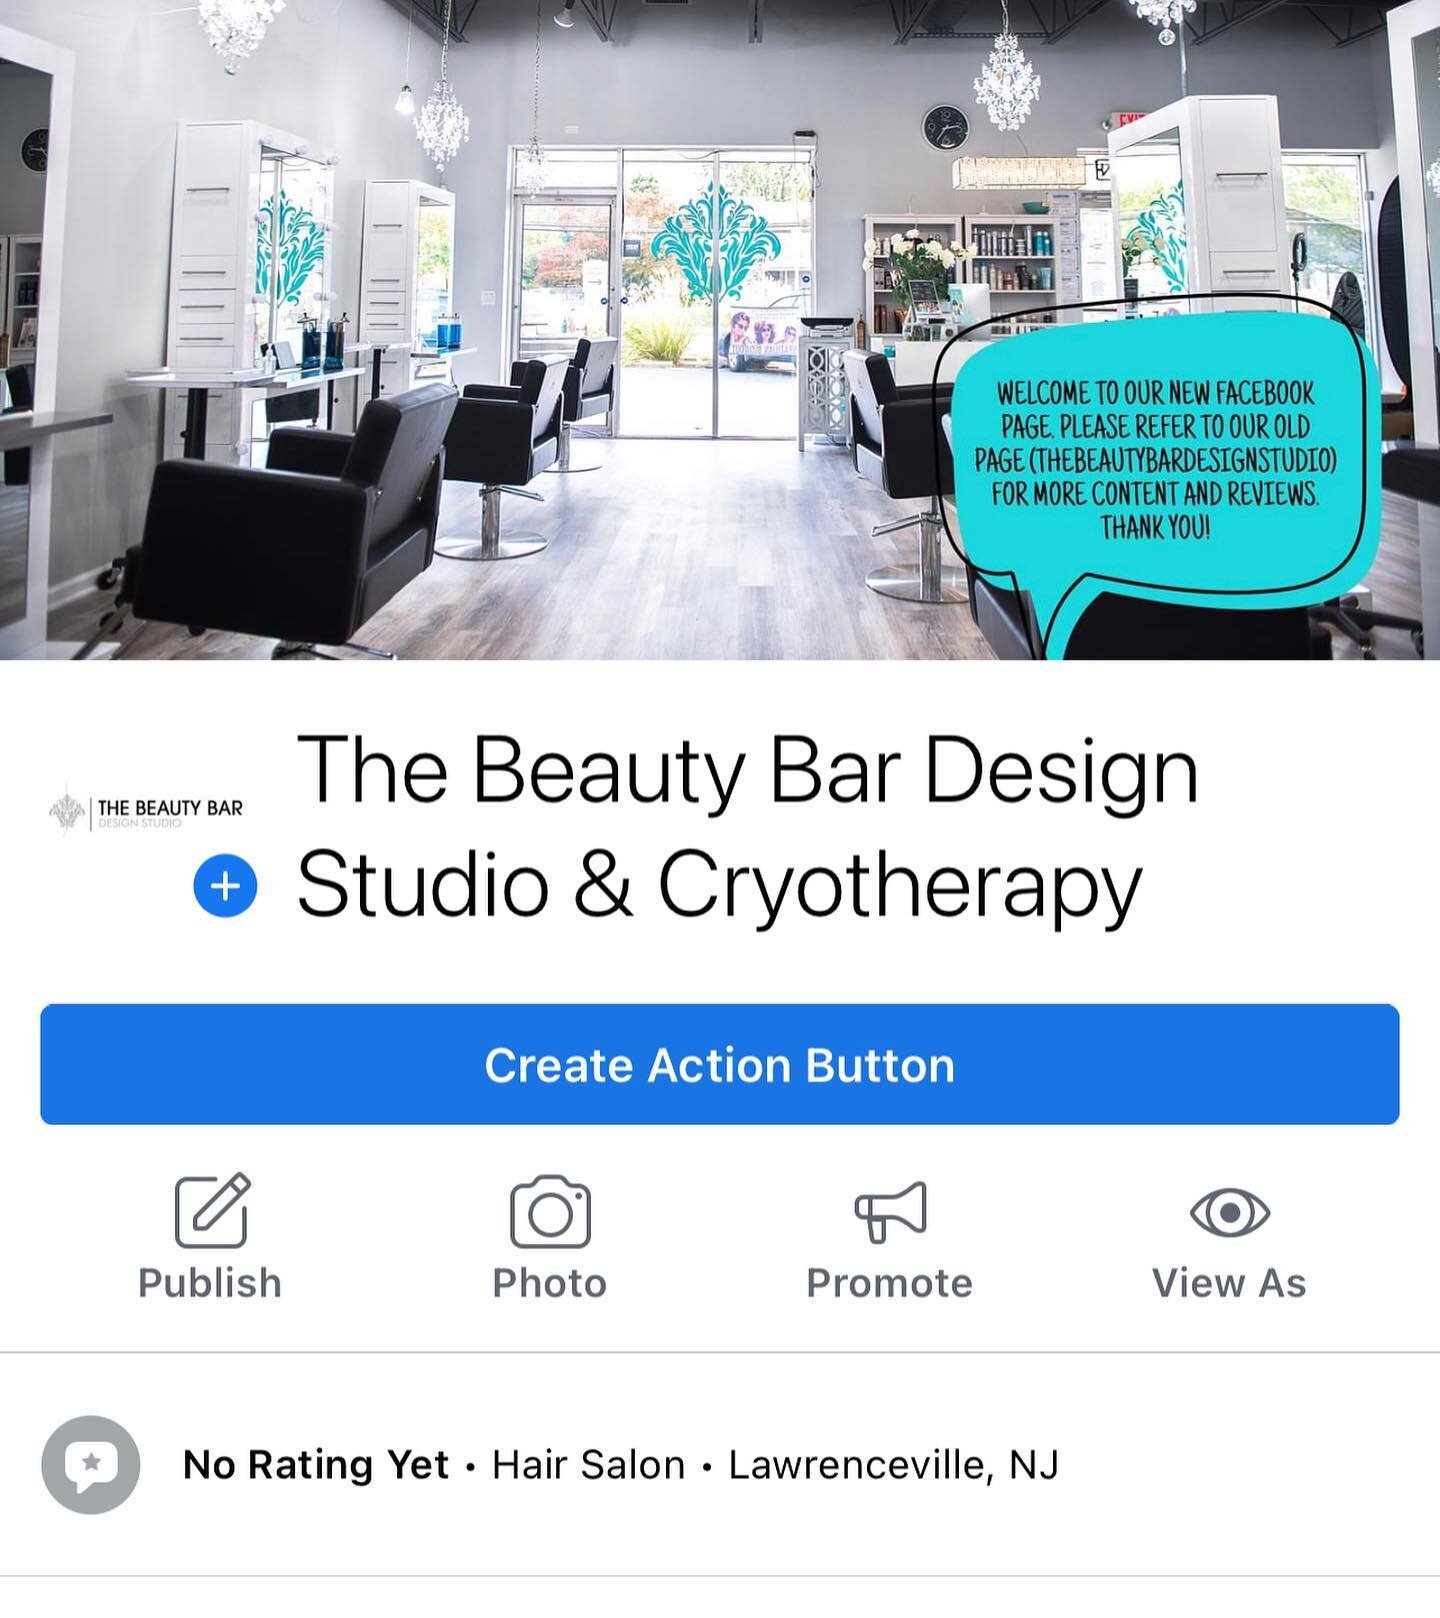 HELLO BEAUTIFUL CLIENTS🤍 

We are sad to say that our old Facebook page was hacked which has lead us to create our New Page! THE BEAUTY BAR DESIGN STUDIO &amp; CRYOTHERAPY. To all of our amazing and loyal clients, we ask that you please help us and 